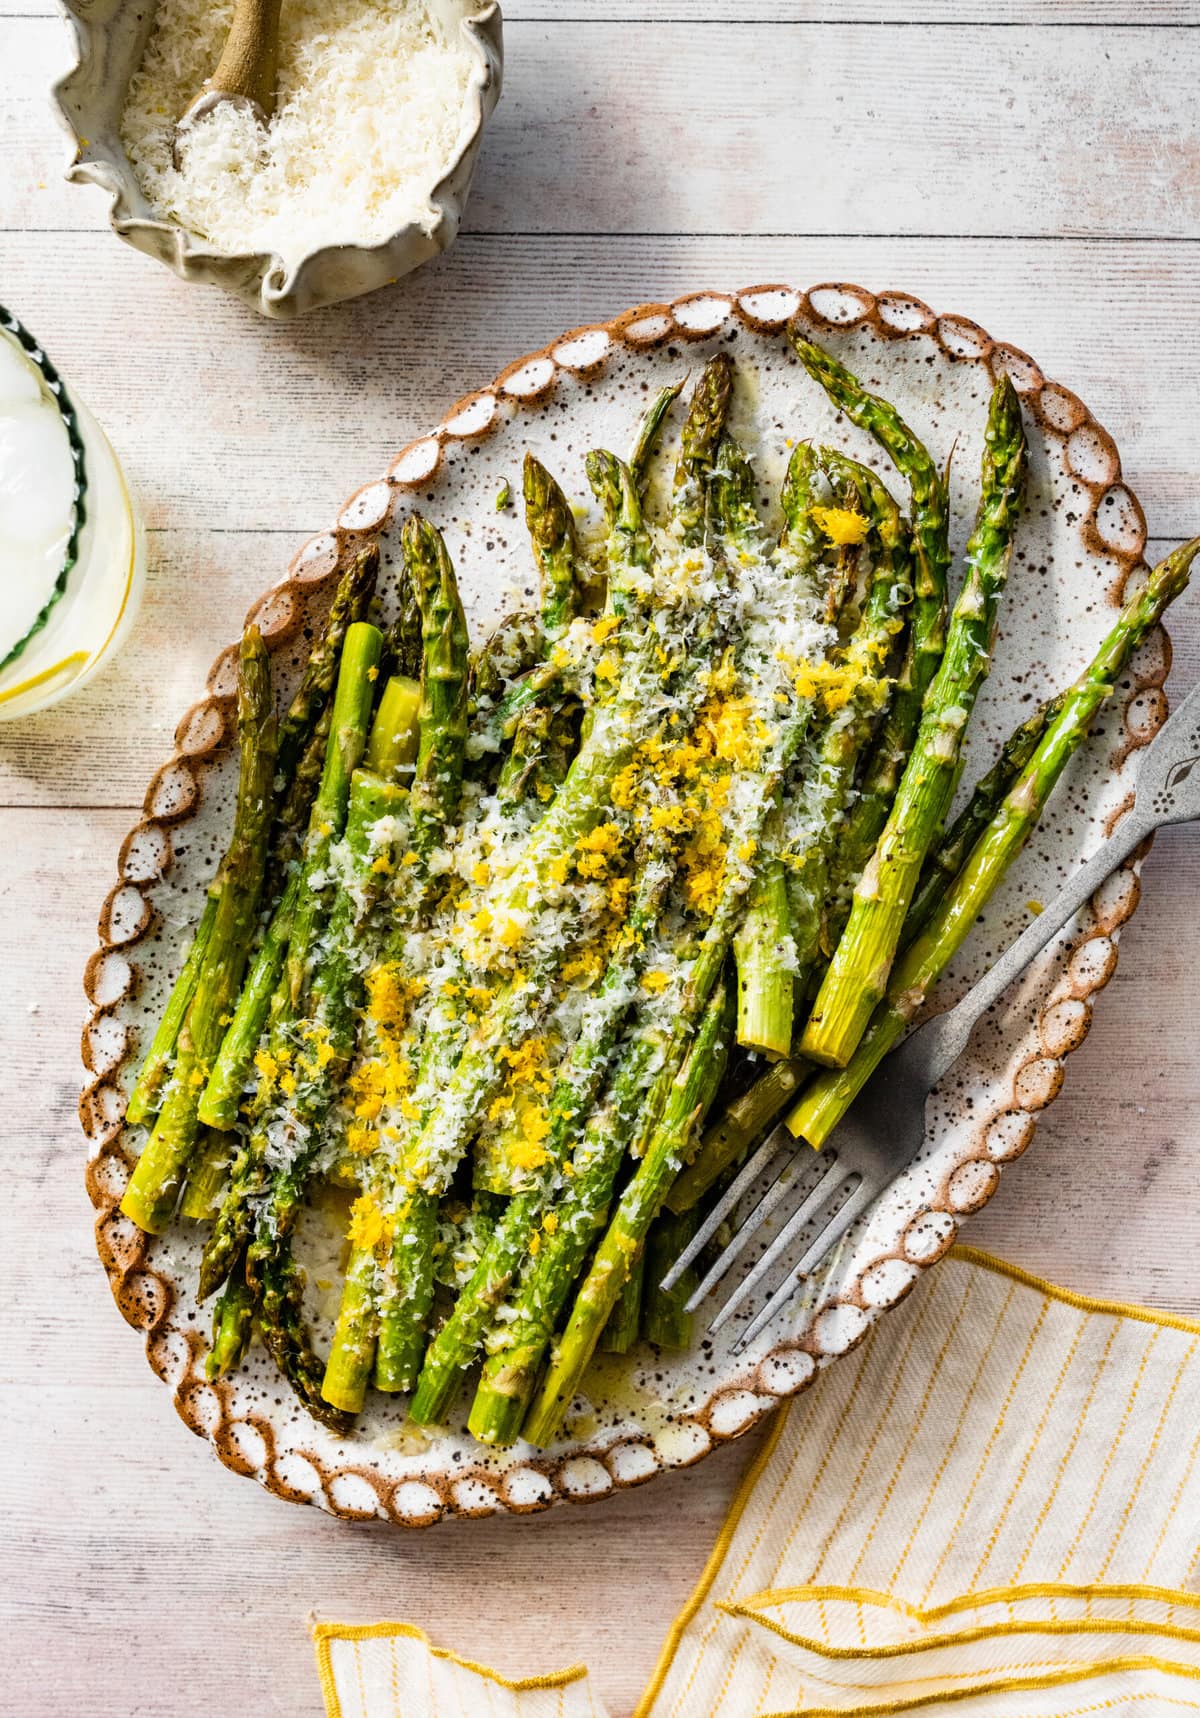 asparagus finished cooking on a white platter with freshly grated parmigiano and lemon on it.